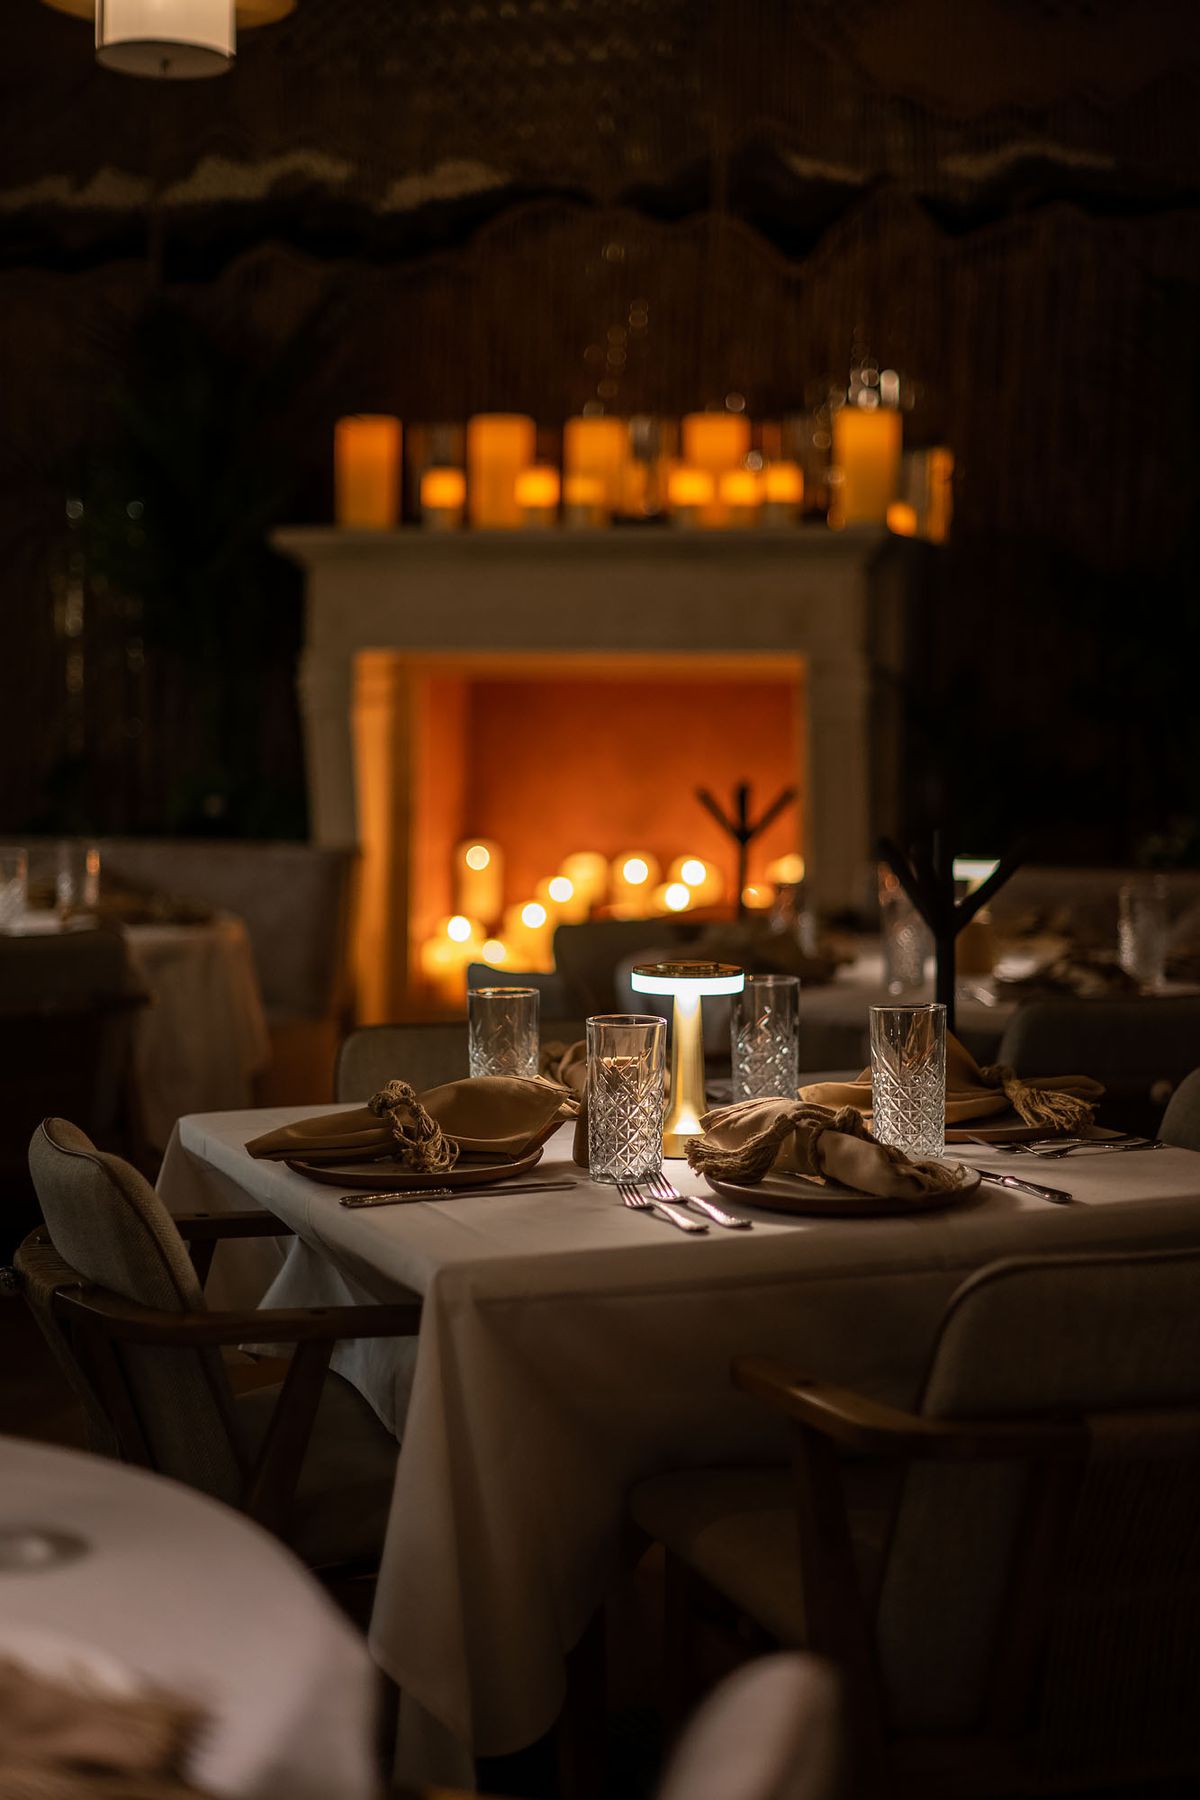 A fireplace filled with tall white candles inside of a dinner restaurant.